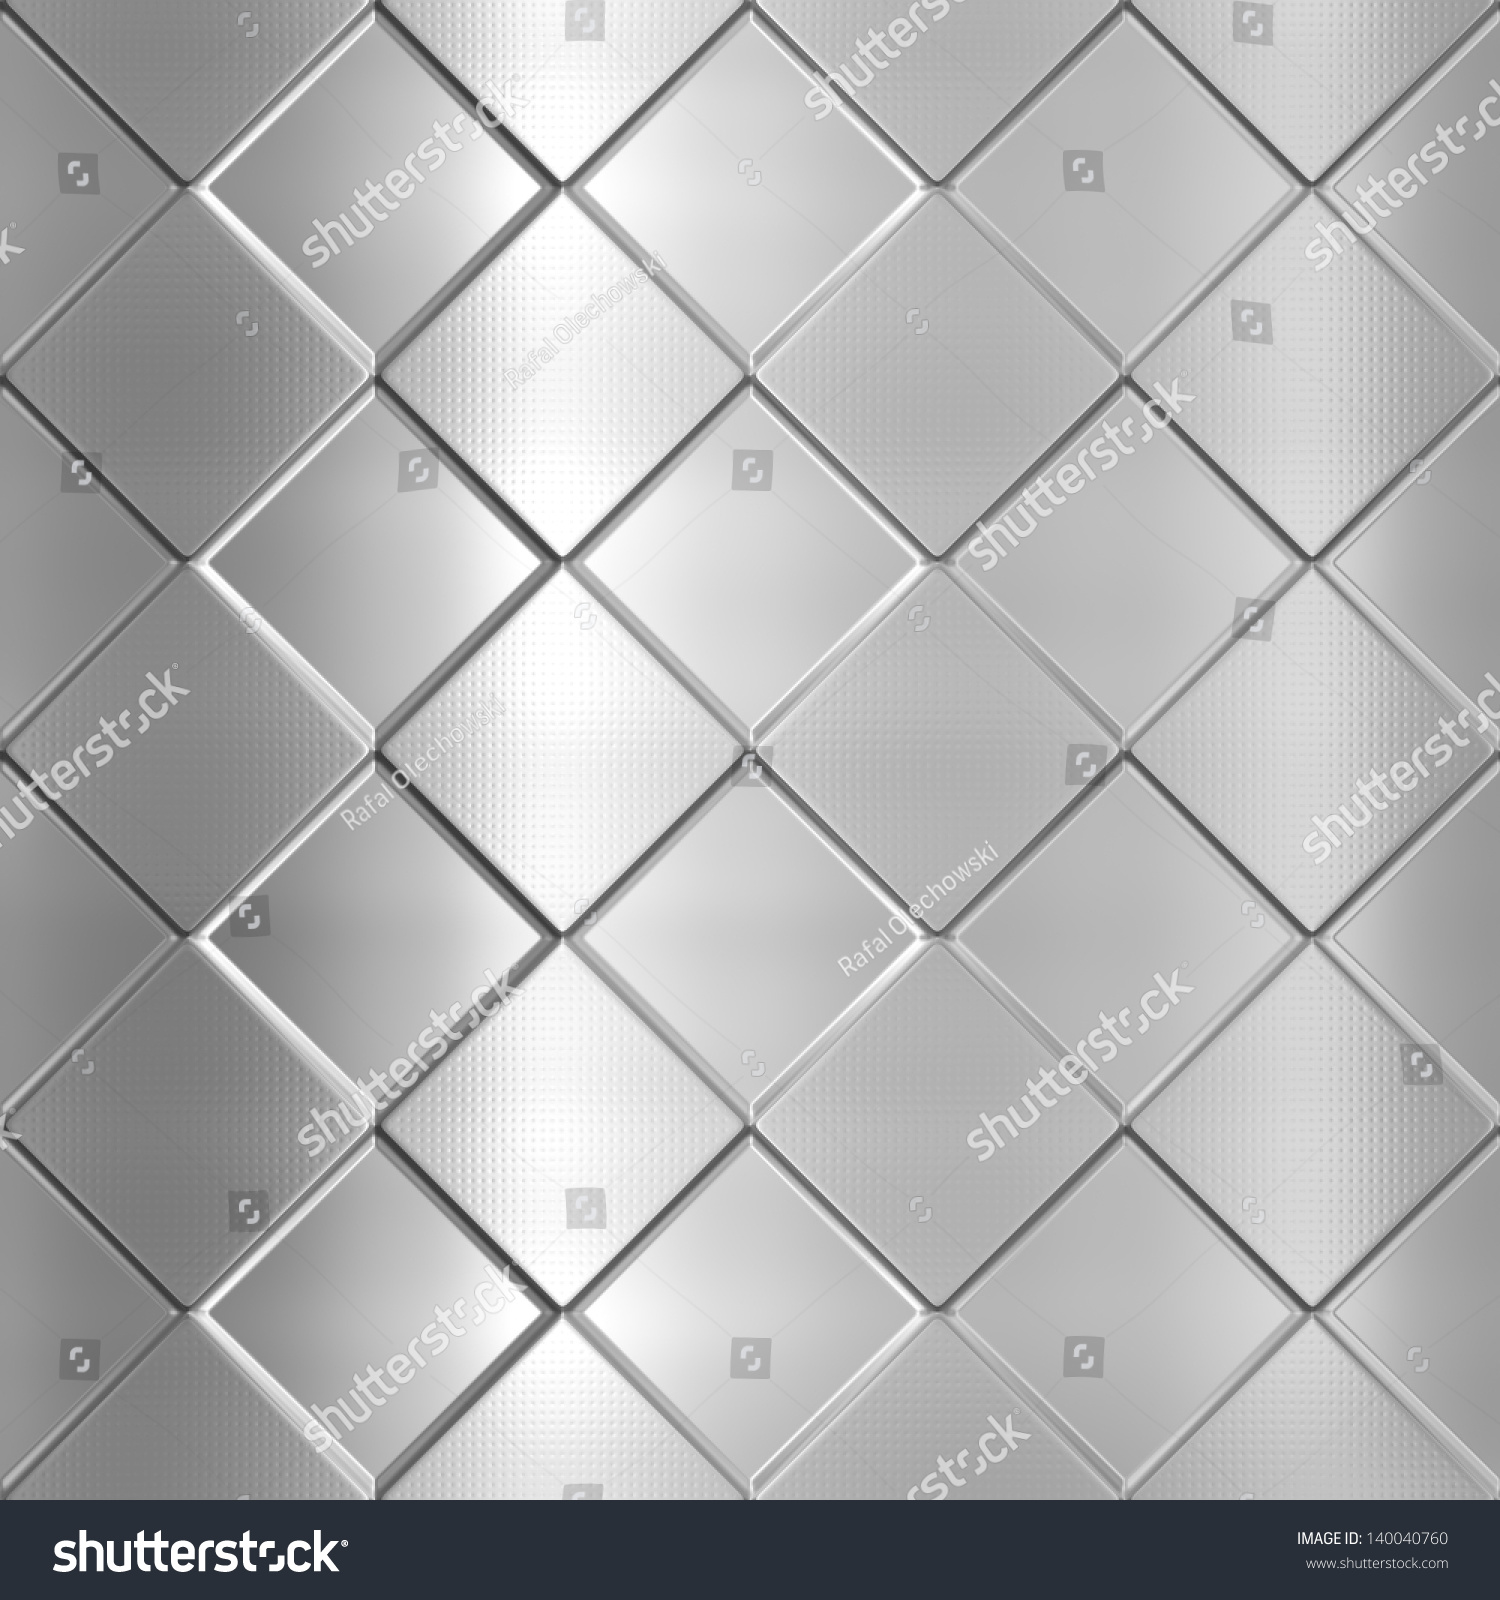 Metal Silver Checked Pattern Background Stock Illustration 140040760 ...